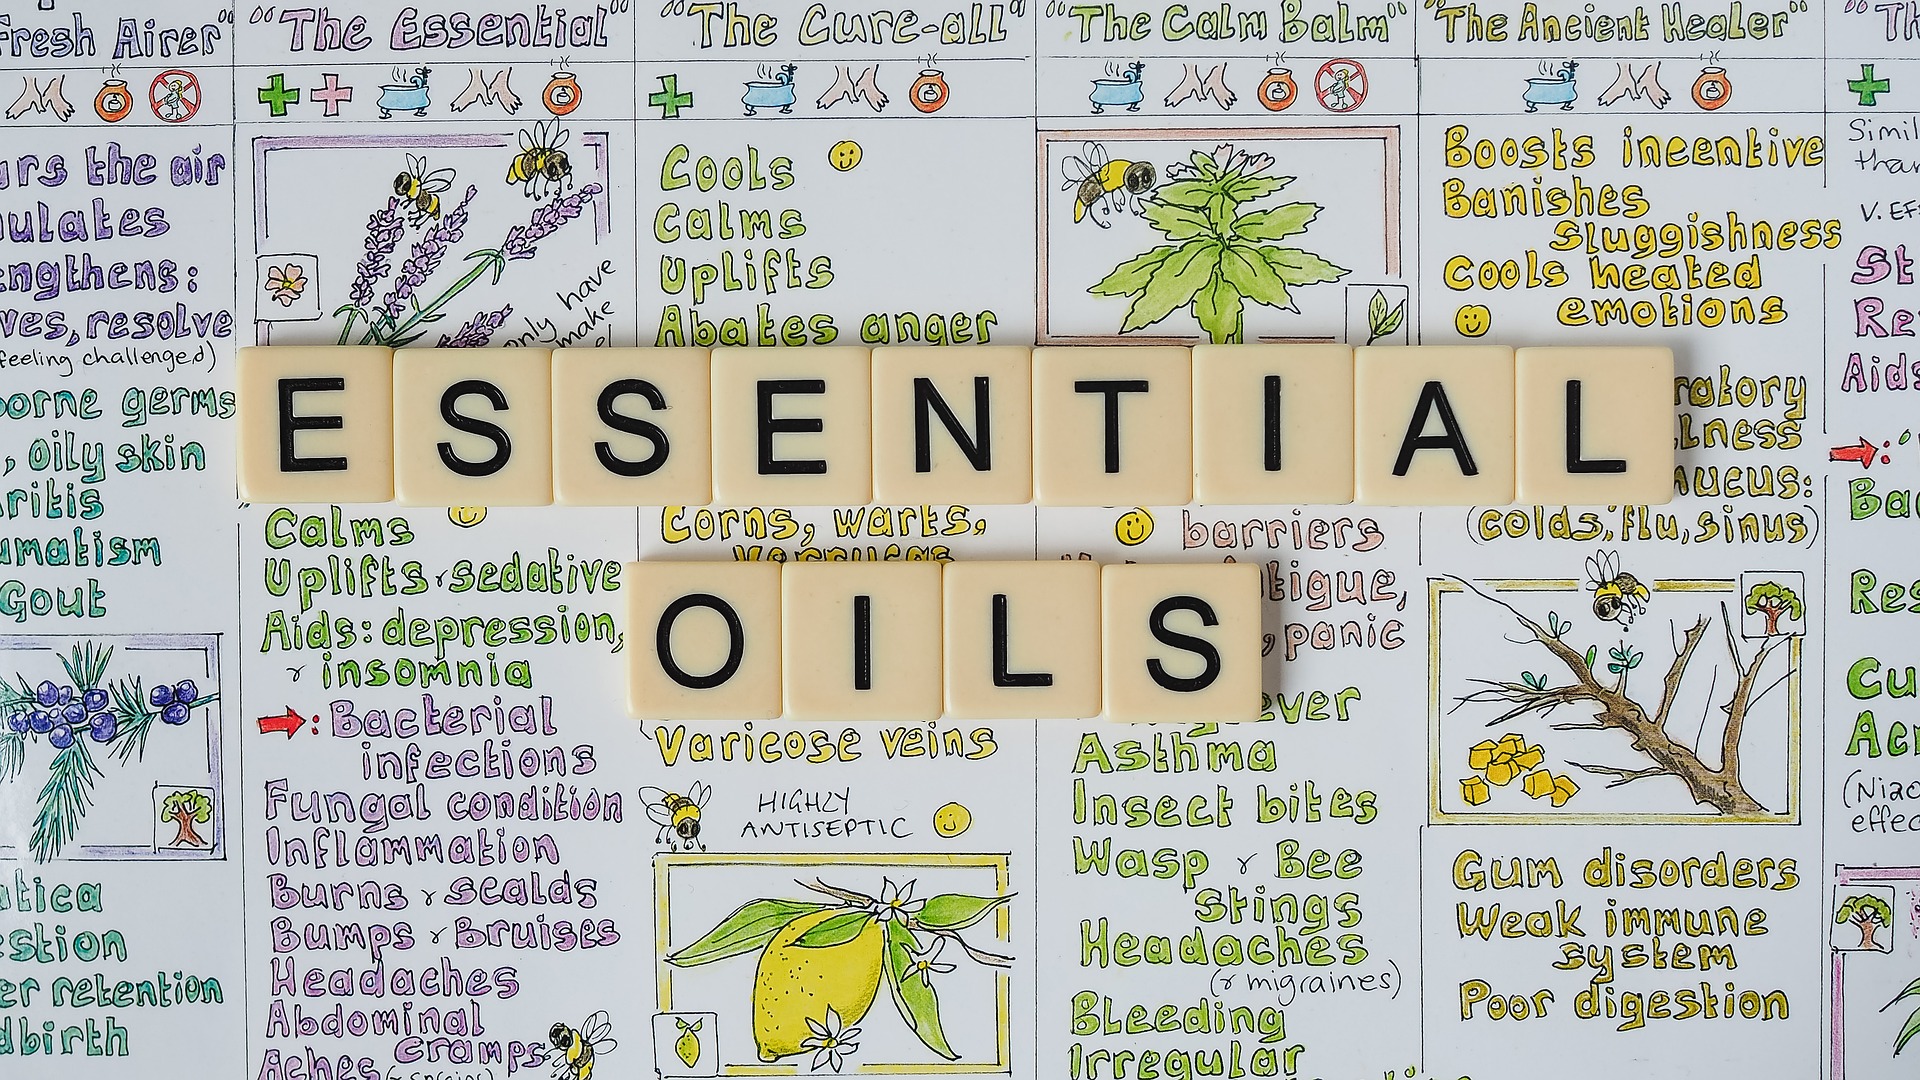 How to use essential oils?